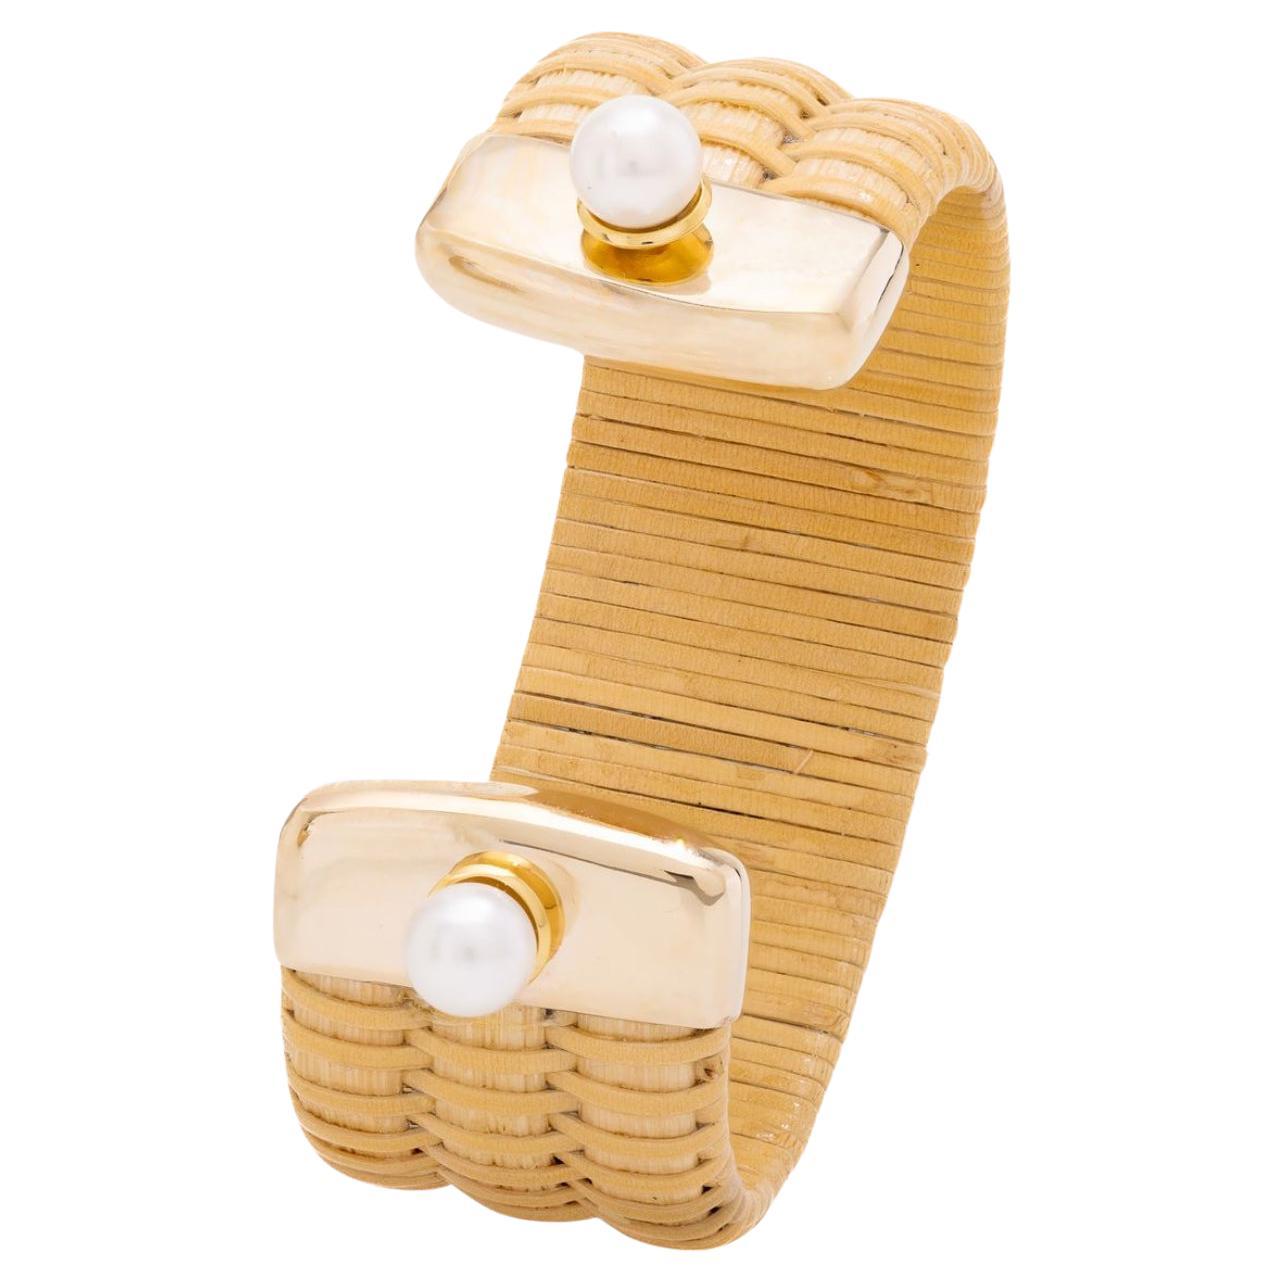 Paris & Lily Nantucket Lightship Basket Cuff Bracelet with Gold & Pearls For Sale